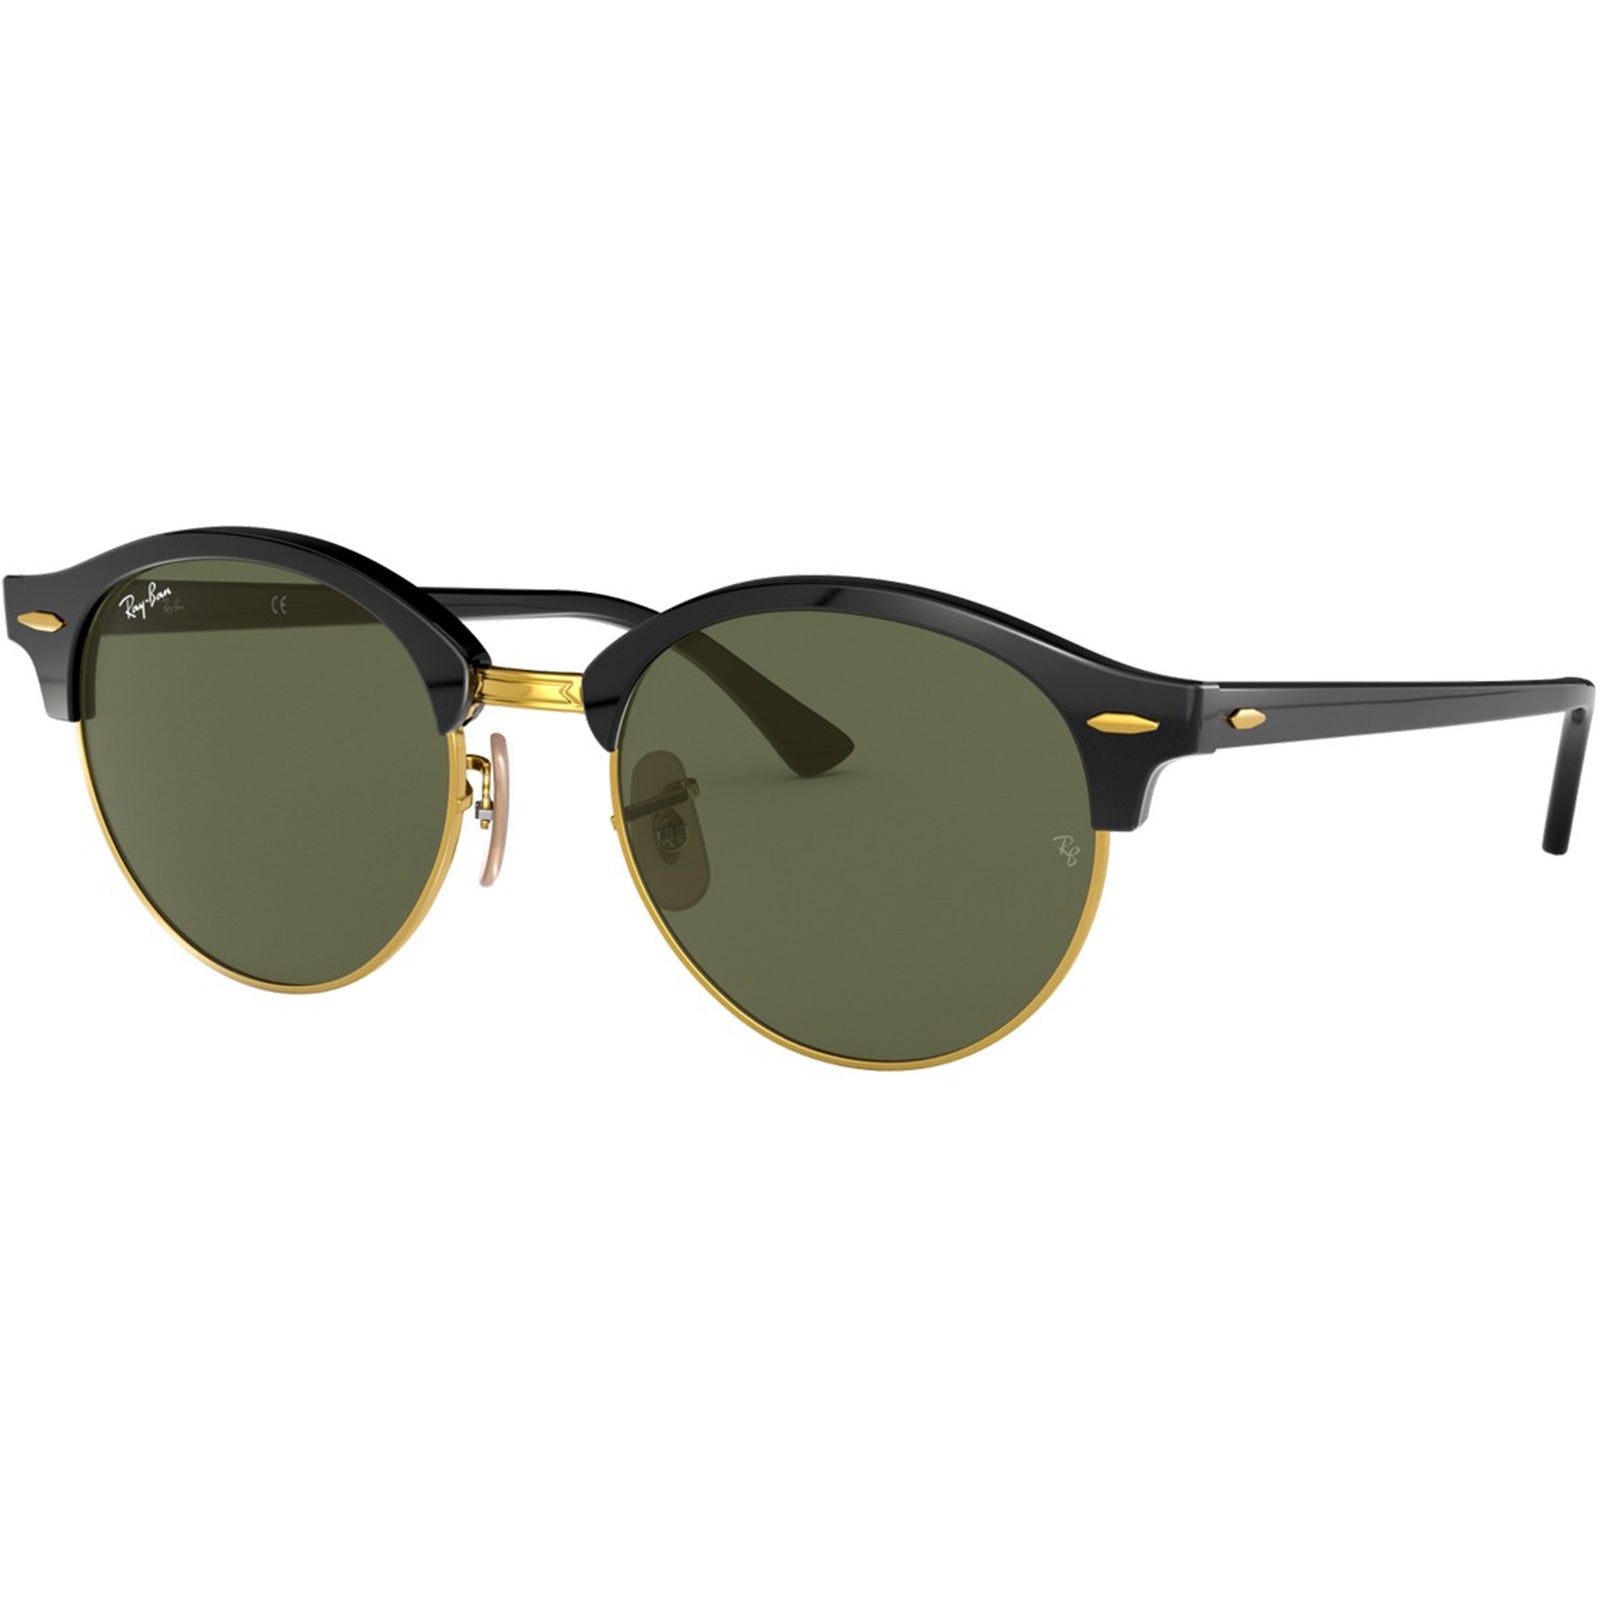 Ray-Ban Clubround Classic Men's Lifestyle Sunglasses-0RB4246